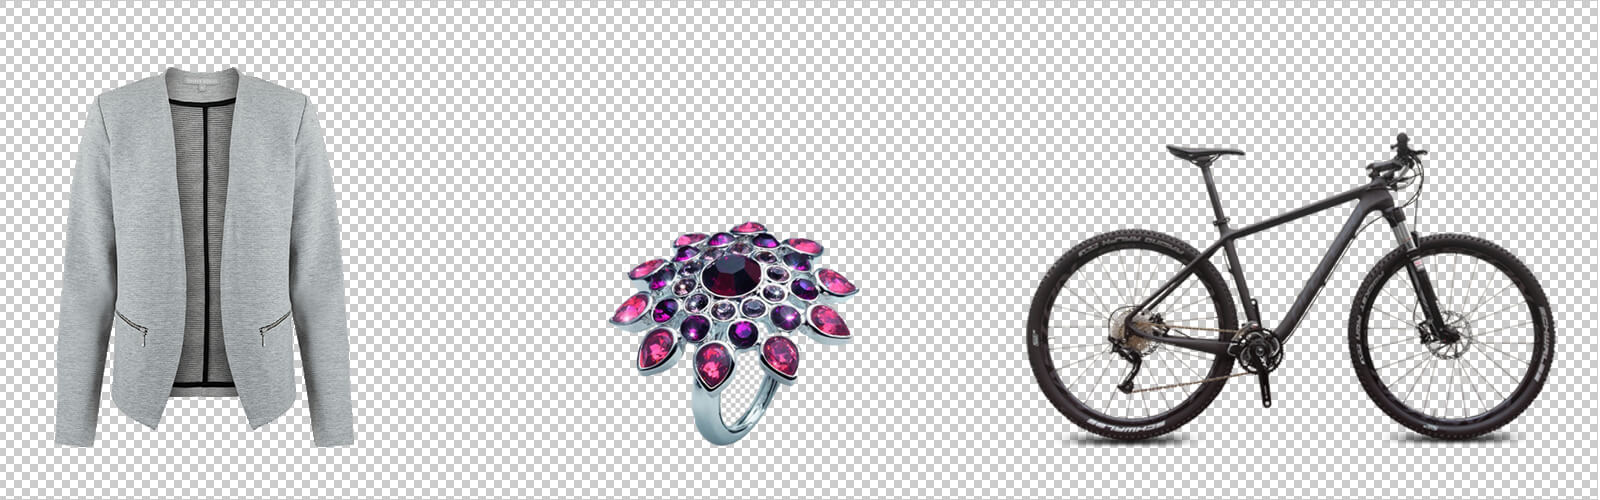 Clipping path services